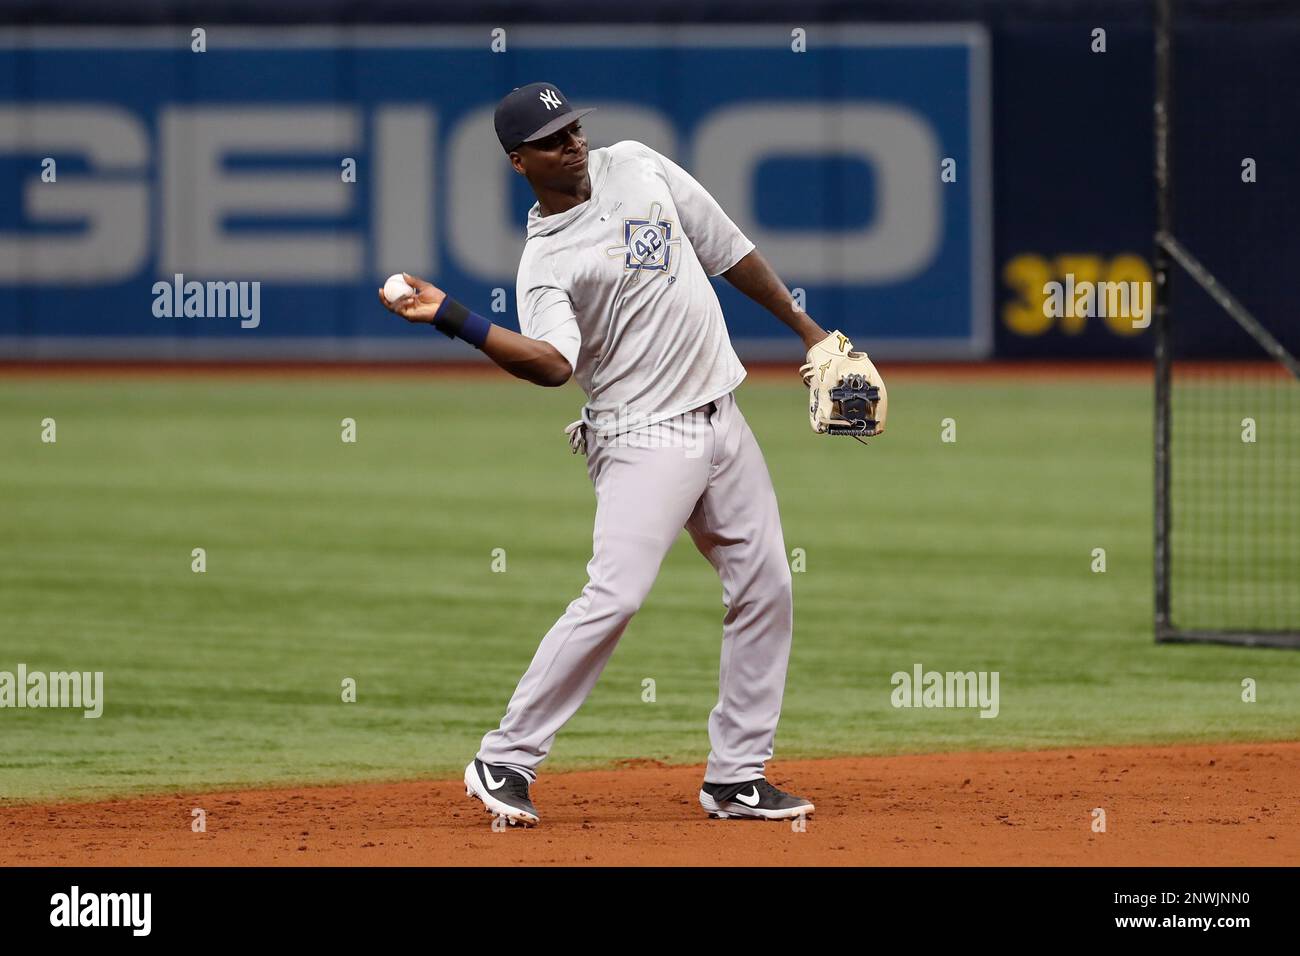 ST. PETERSBURG, FL - SEPTEMBER 27: New York Yankees shortstop Didi Gregorius (18) takes ground balls before the regular season MLB game between the New York Yankees and Tampa Bay Rays on September 27, 2018 at Tropicana Field in St. Petersburg, FL. (Photo by Mark LoMoglio/Icon Sportswire) (Icon Sportswire via AP Images) Foto Stock